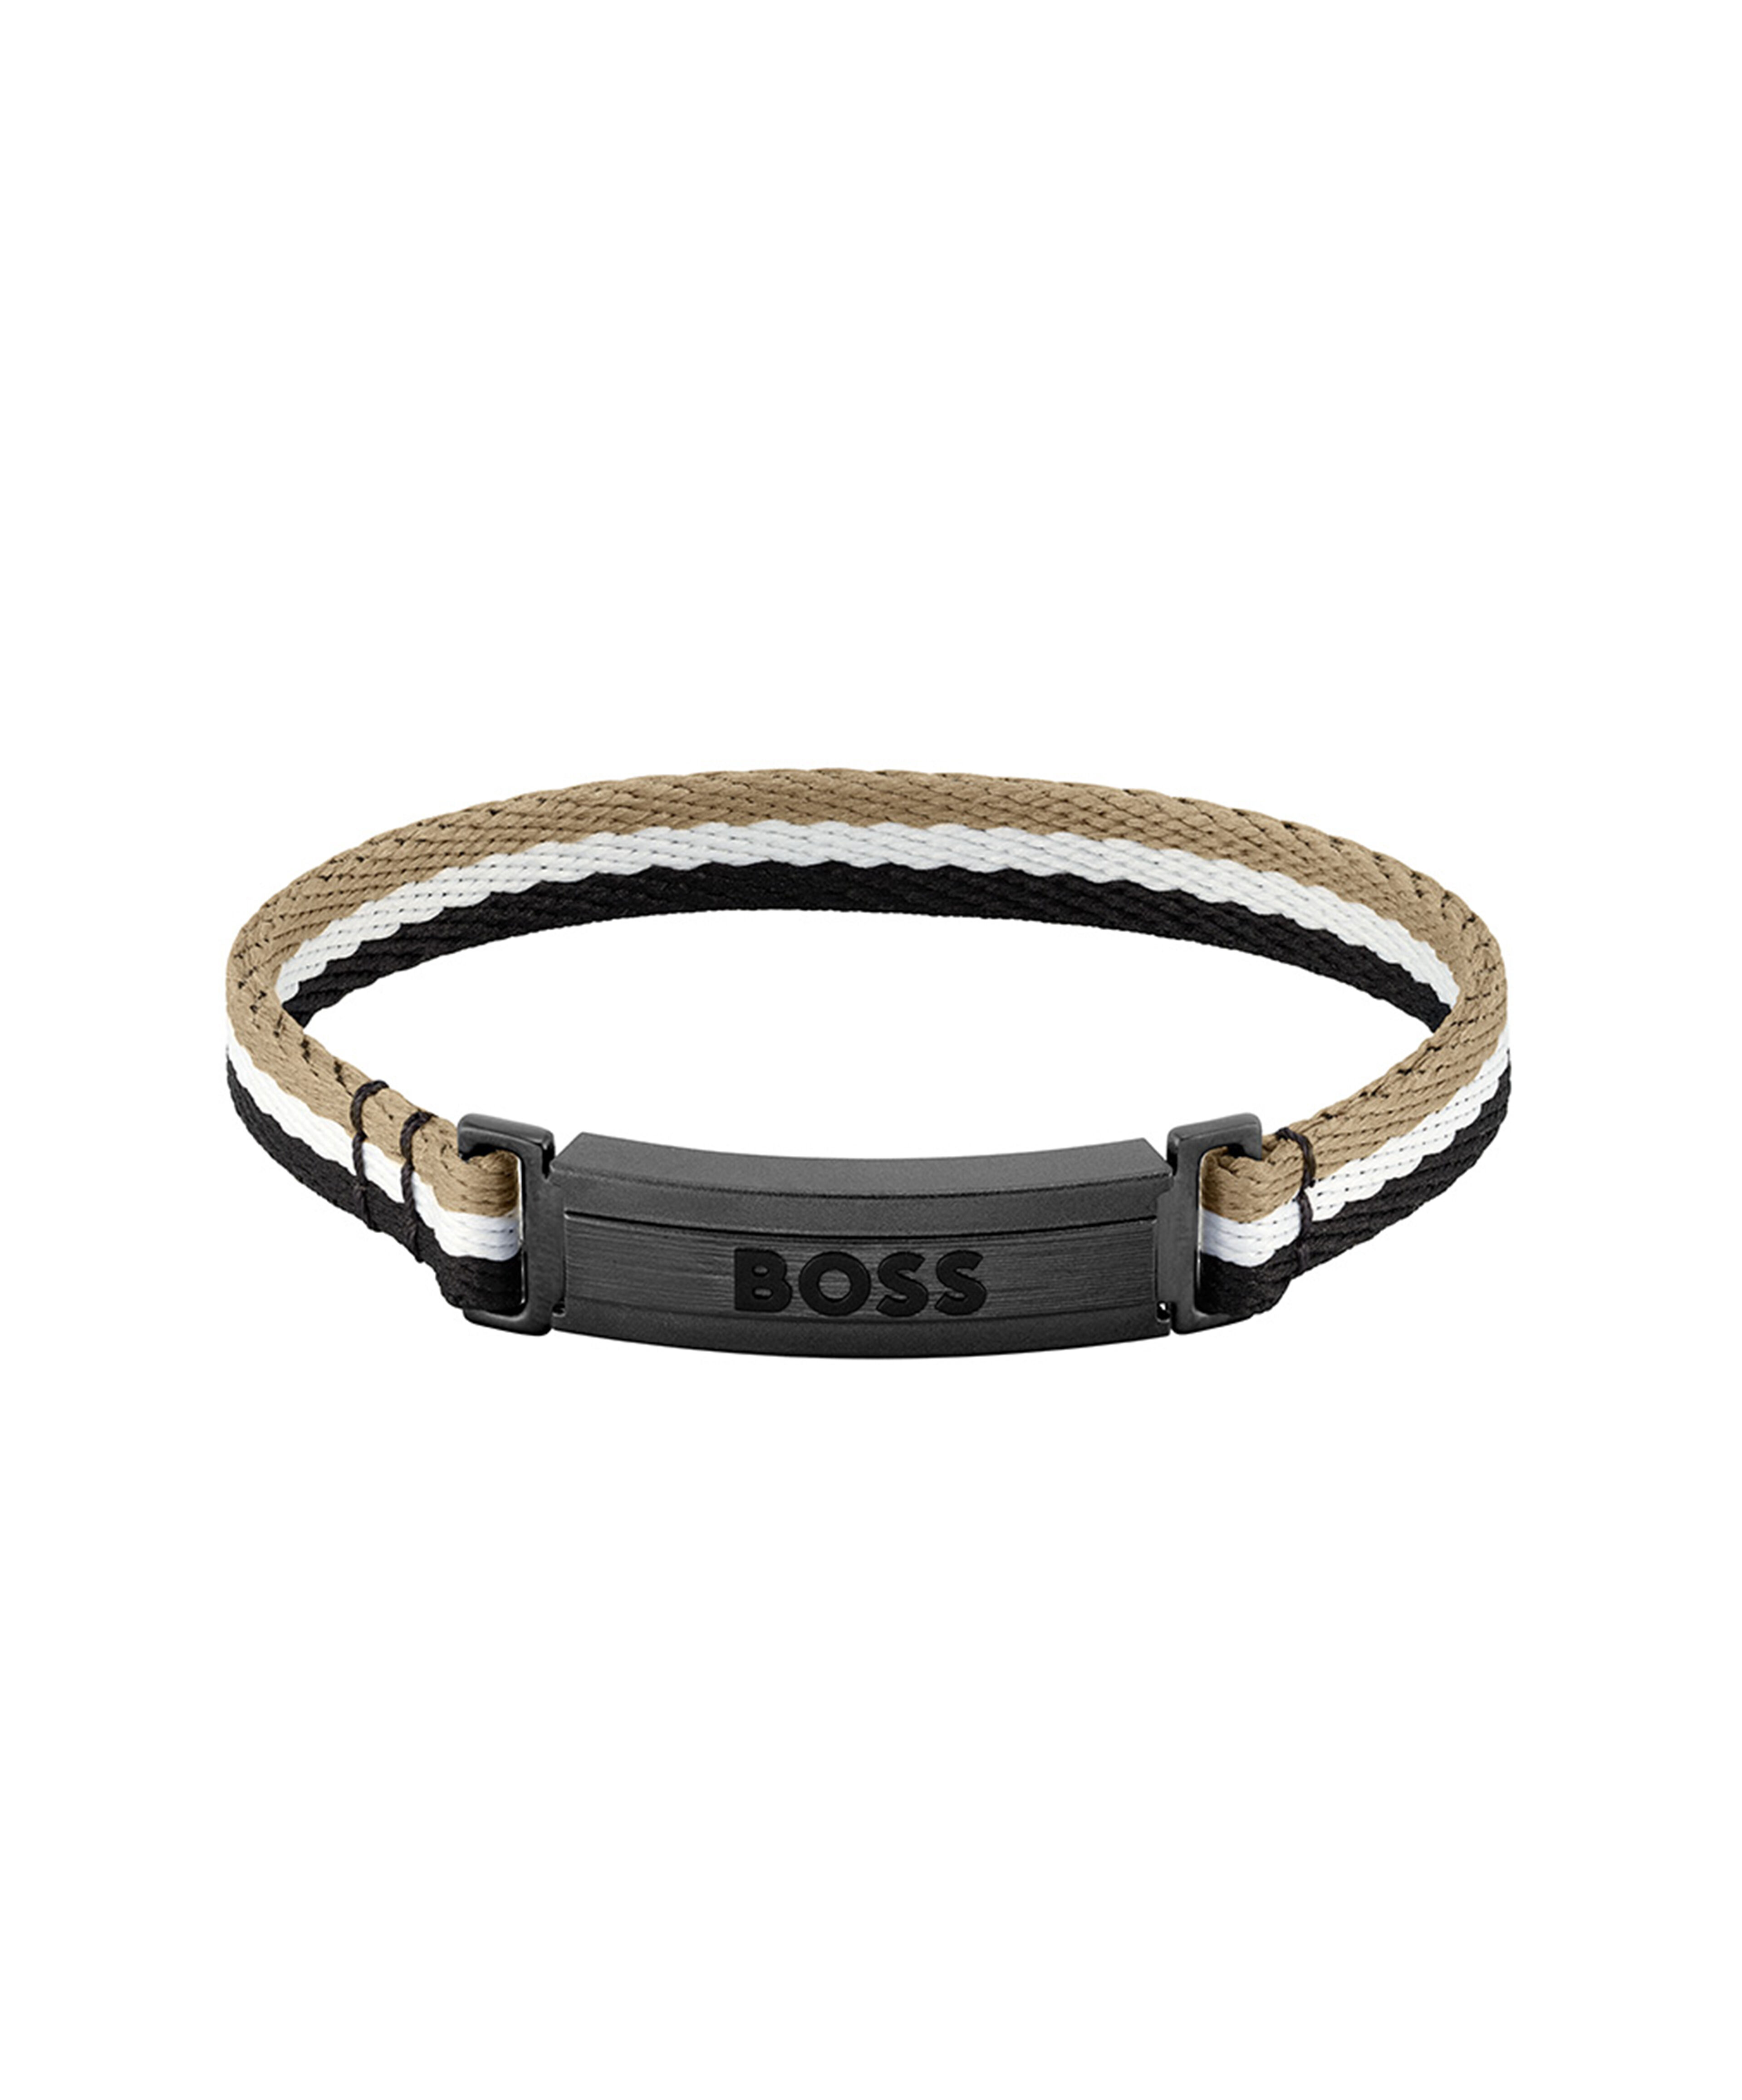 Hugo Boss Orlado Reversible Blue Ion-Plated and Stainless Steel Bracelet |  Men's | REEDS Jewelers